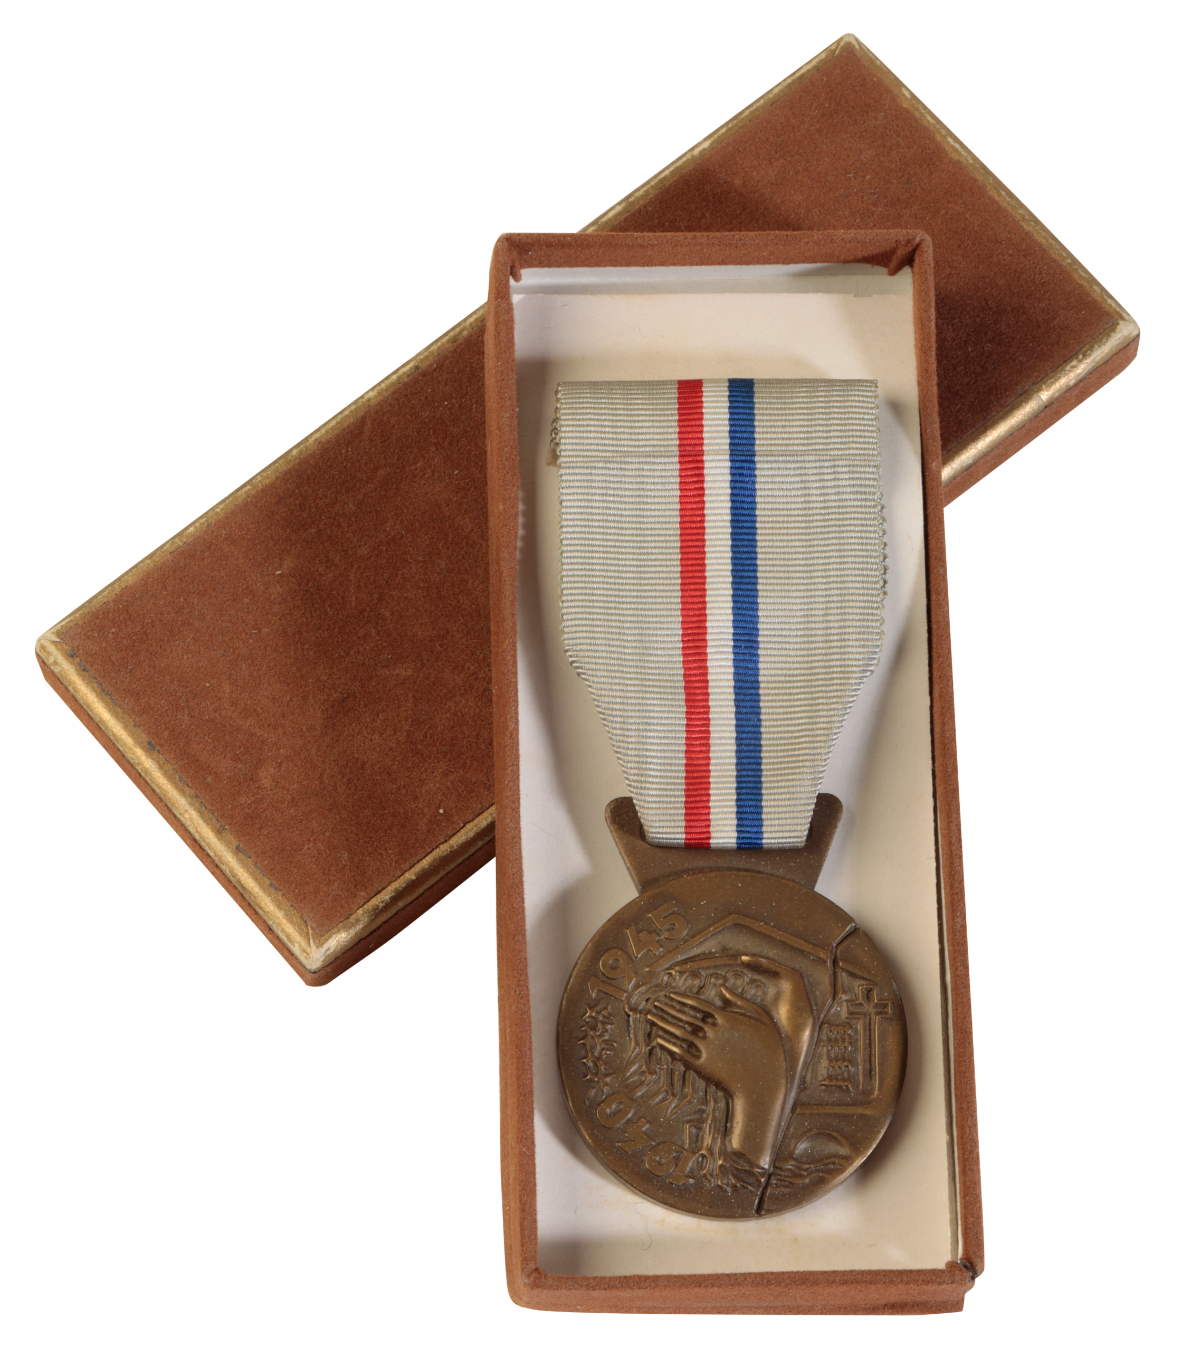 LUXEMBOURG MEDAL OF NATIONAL RECOGNITION 3ade09